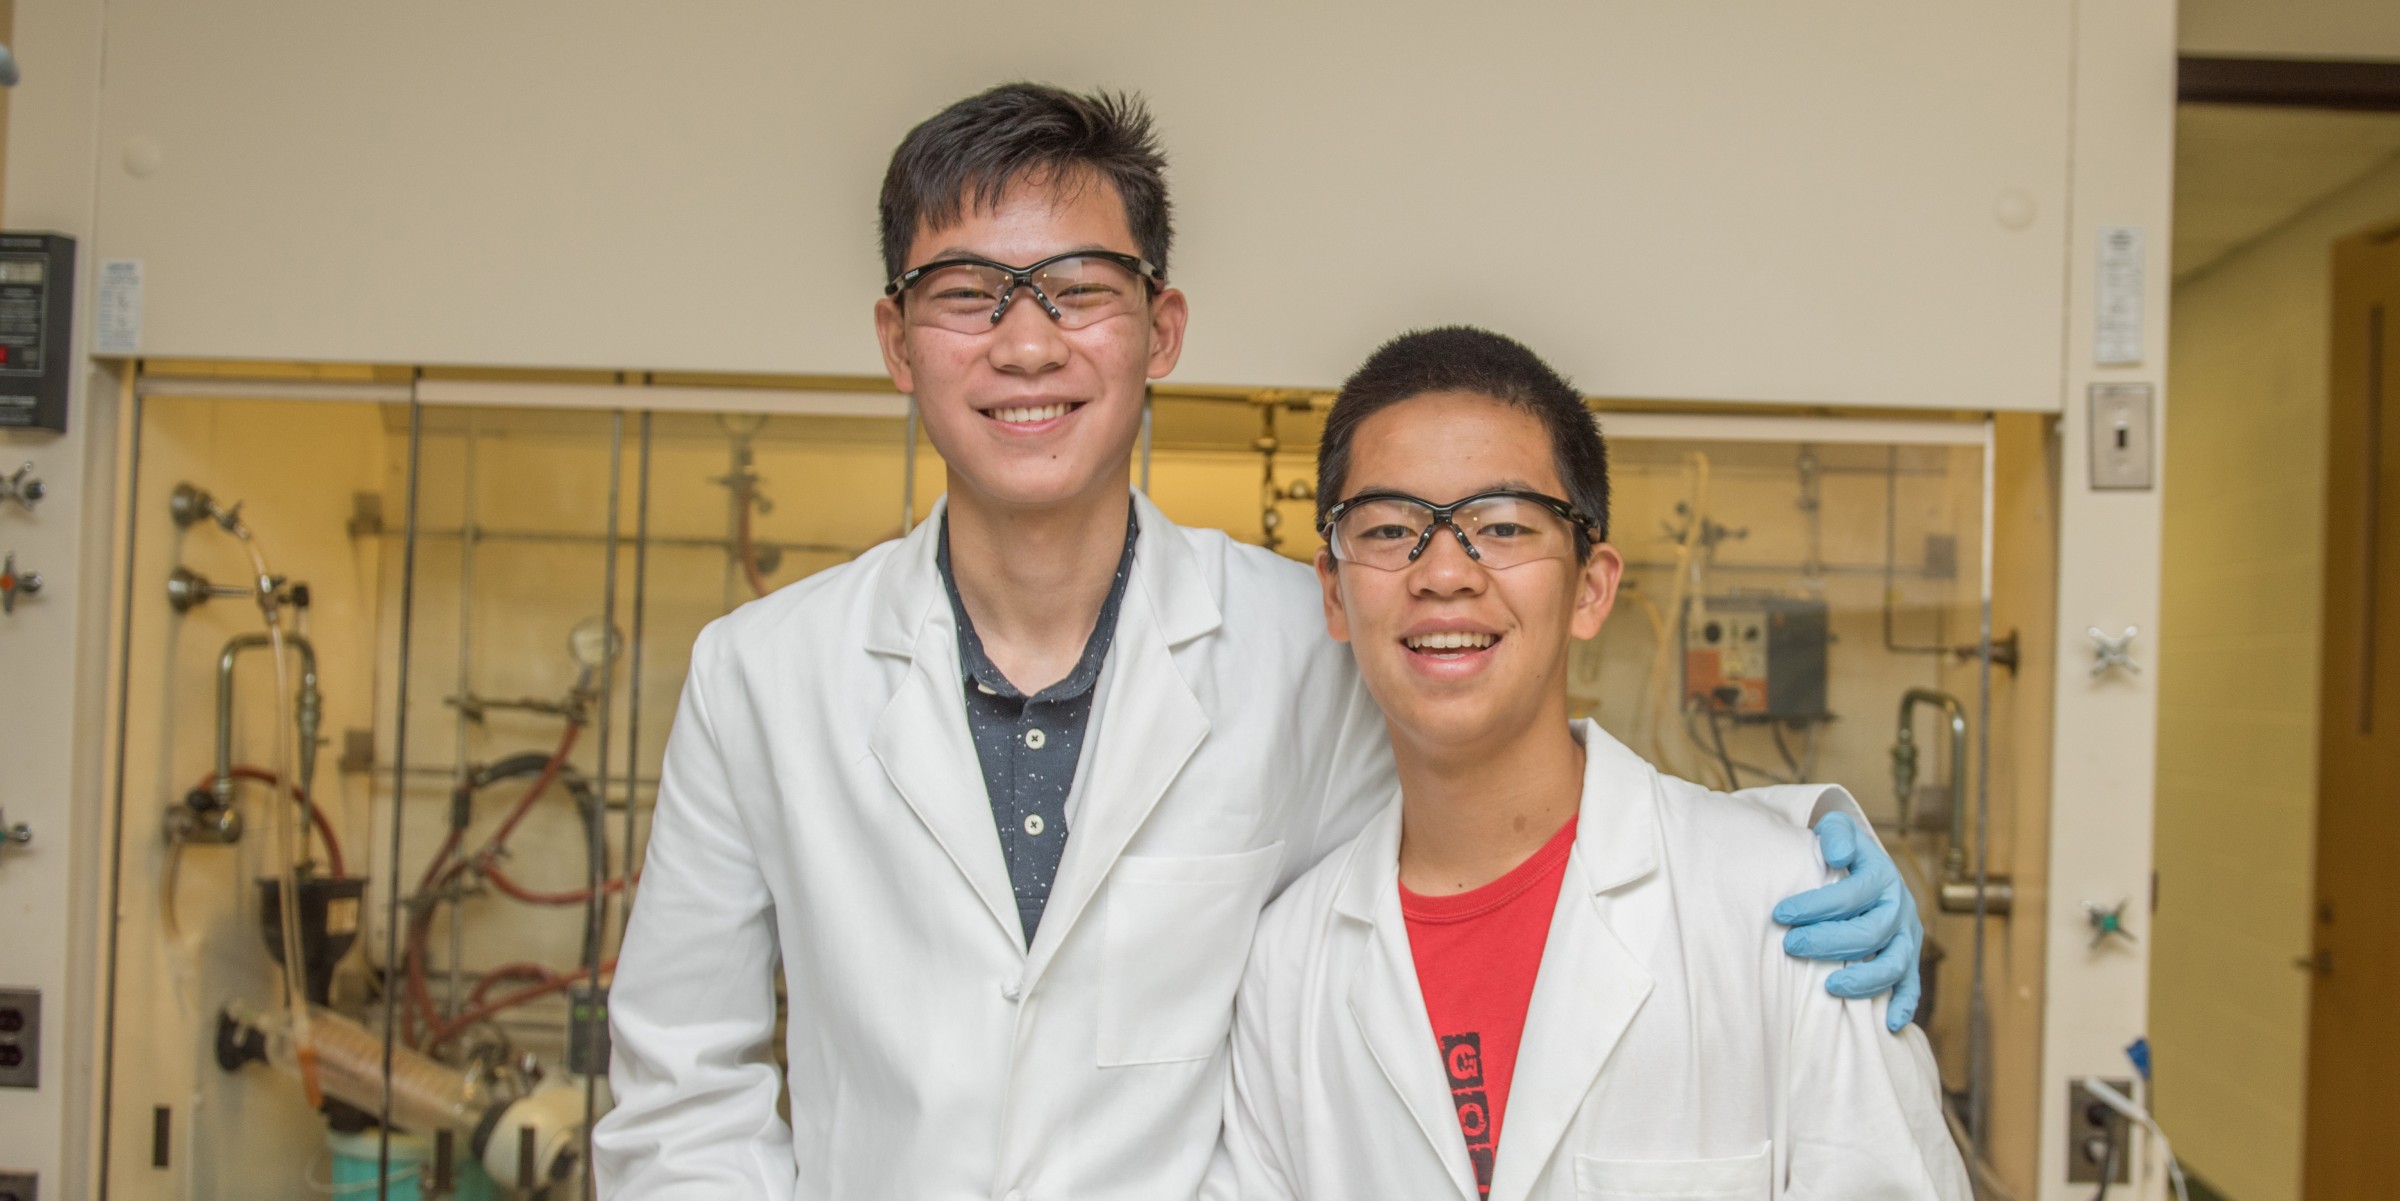 Two students in lab coats pose for photo